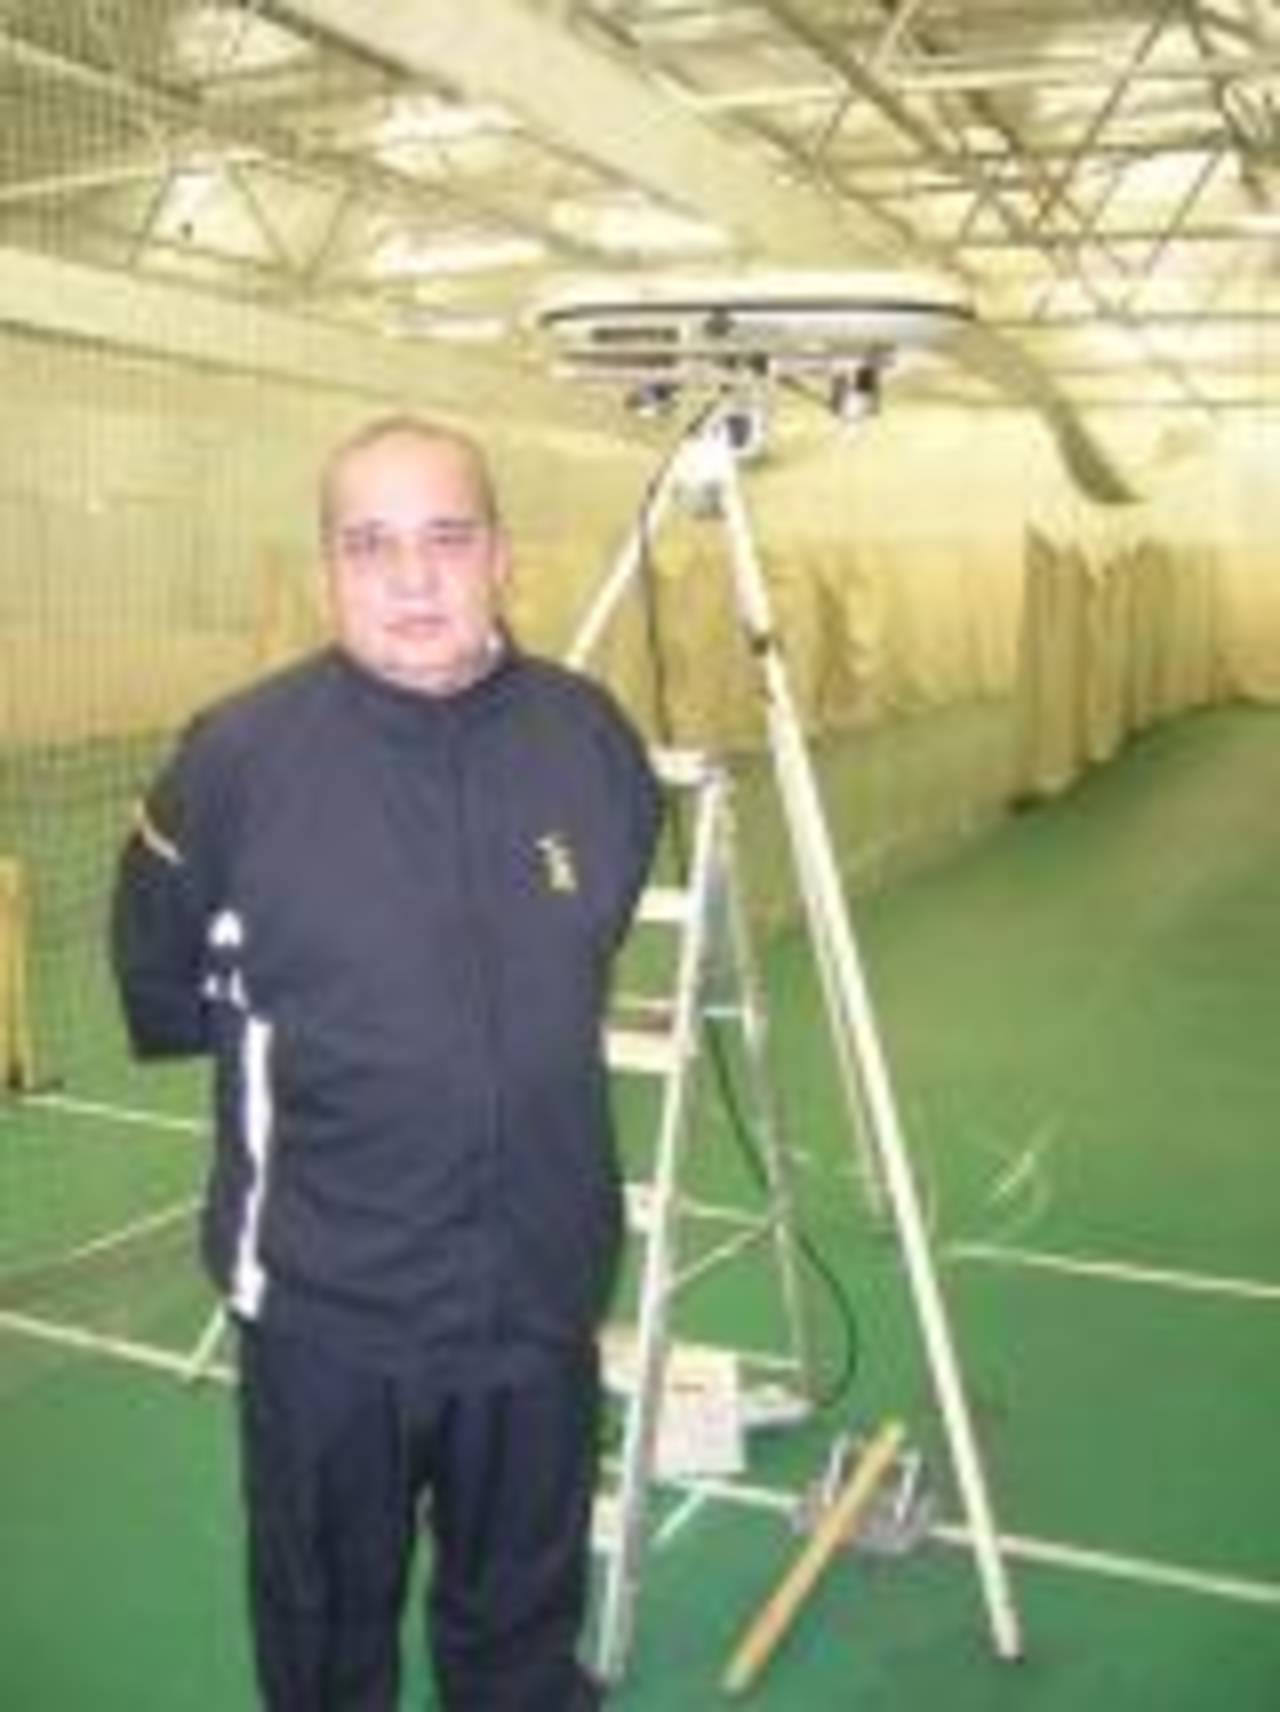 Joe Hussain at the Illford Cricket School's coaching centre, Chelmsford, July 12, 2007